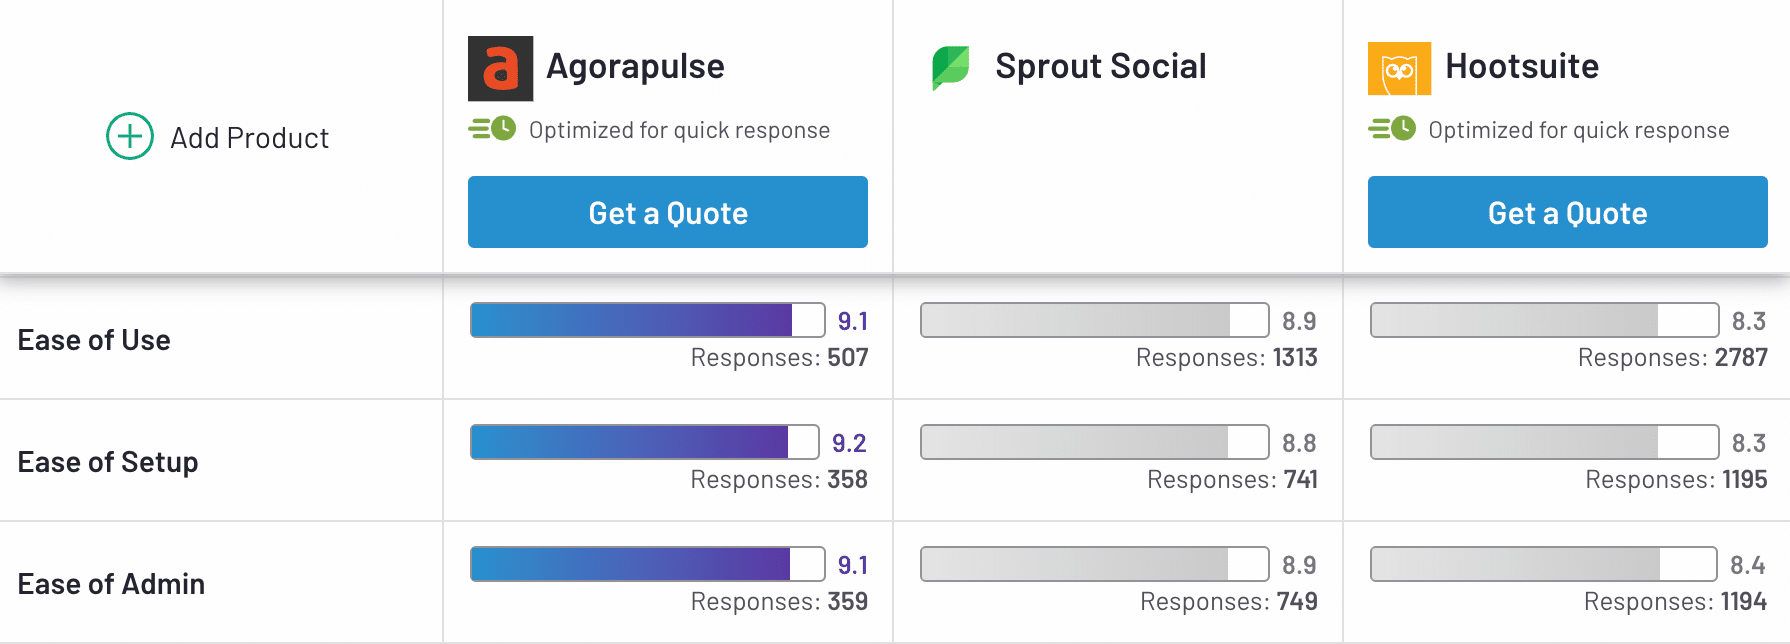 ease of use, setup and admin ratings of agorapulse, sprout social, and hootsuite